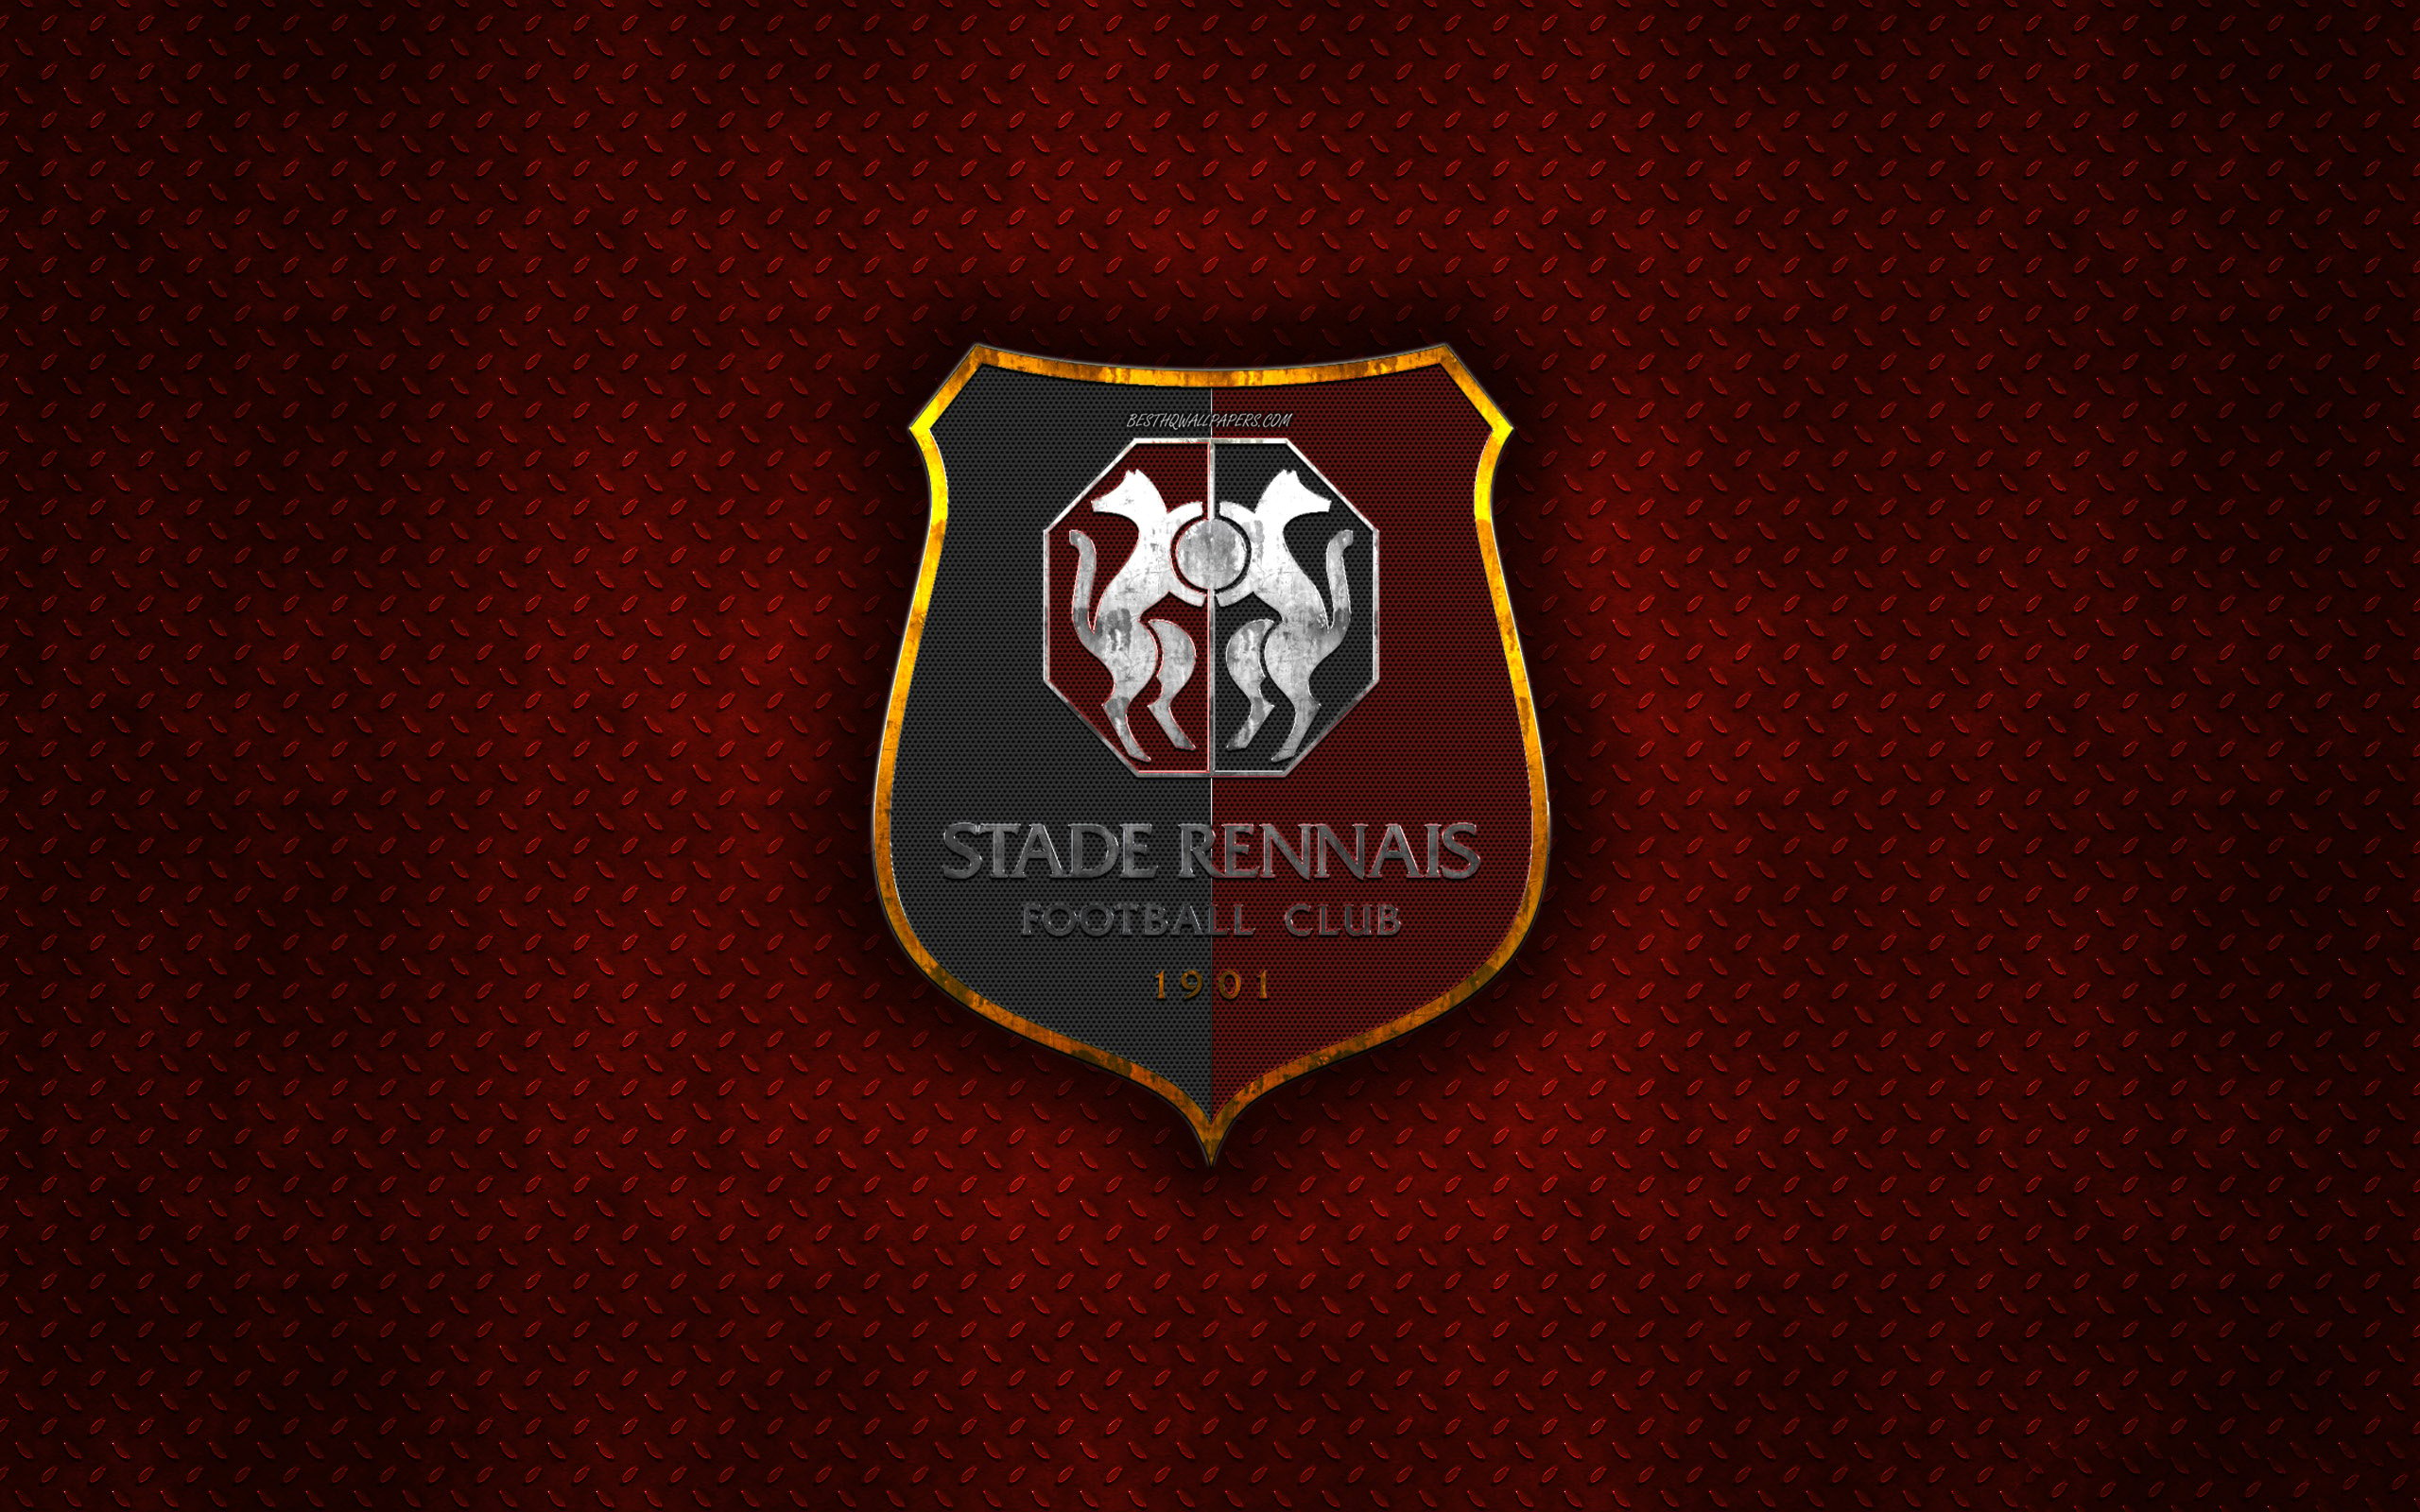 Download wallpaper Stade Rennais FC, French football club, red